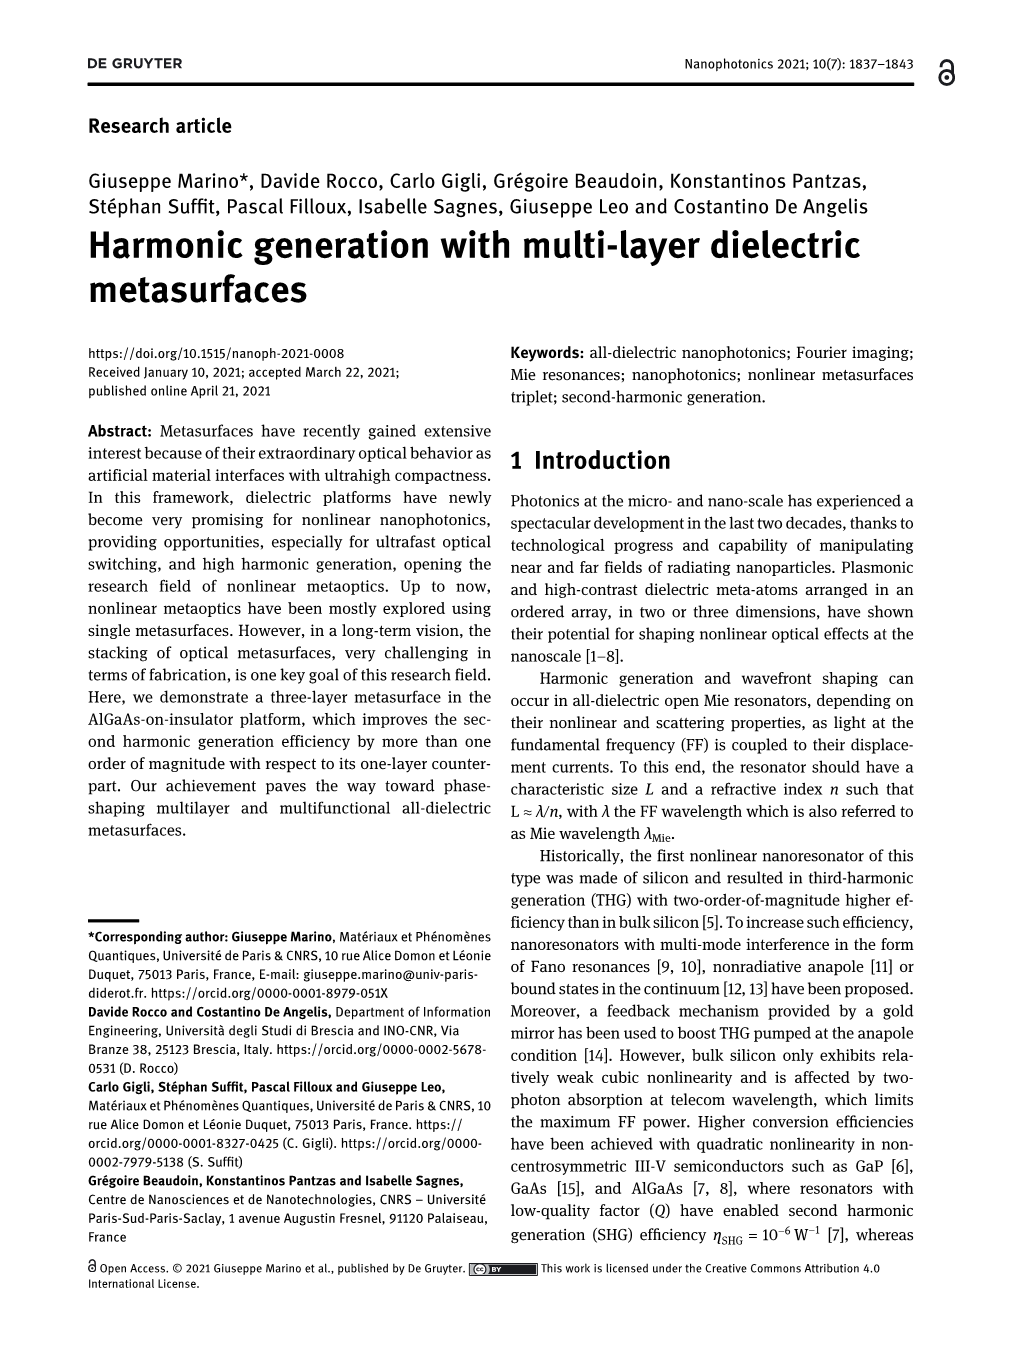 Harmonic Generation with Multi-Layer Dielectric Metasurfaces